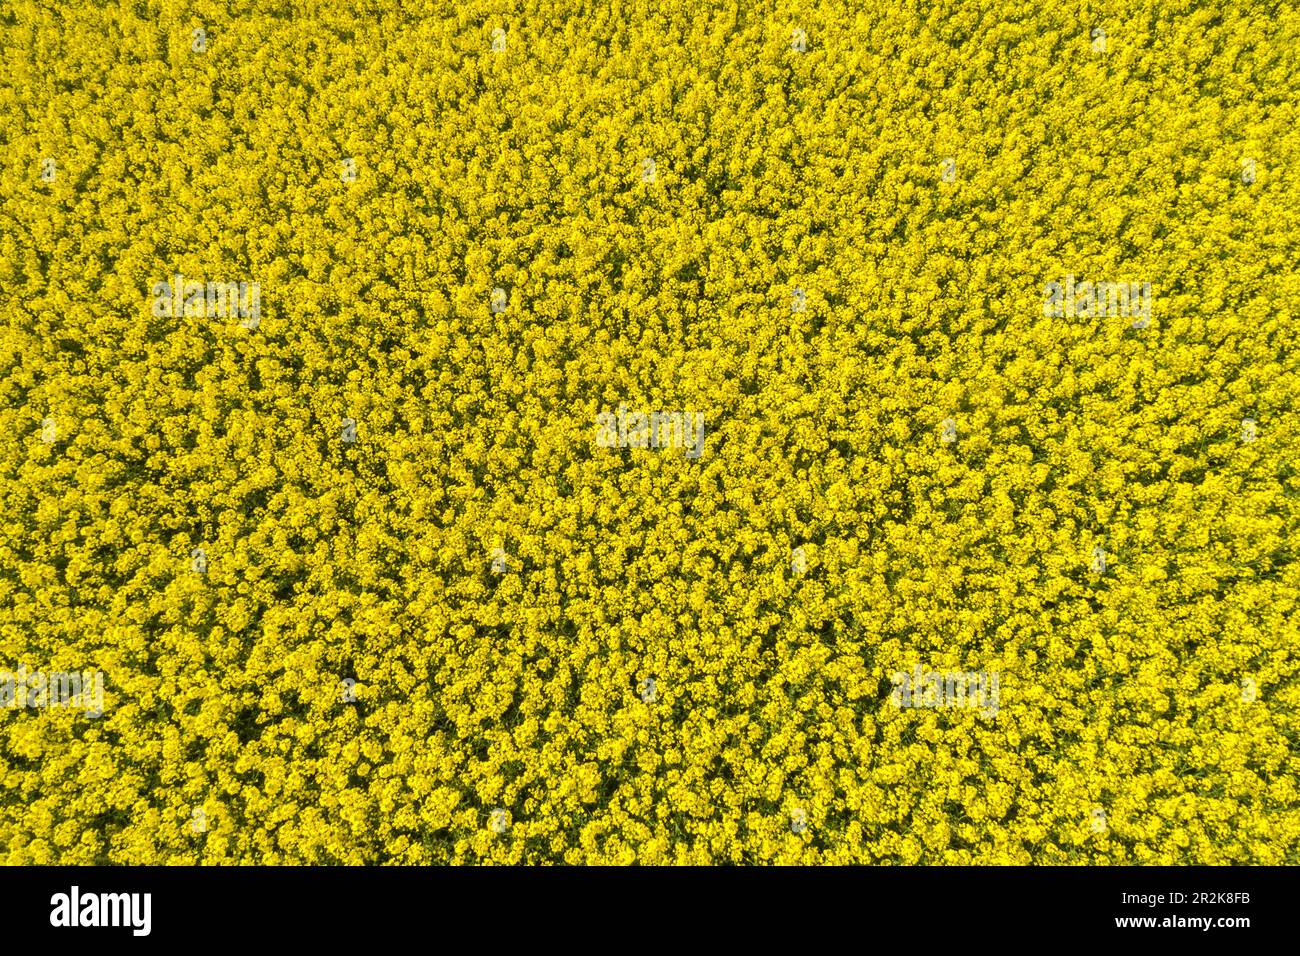 Aerial view of yellow canola field, Germany Stock Photo